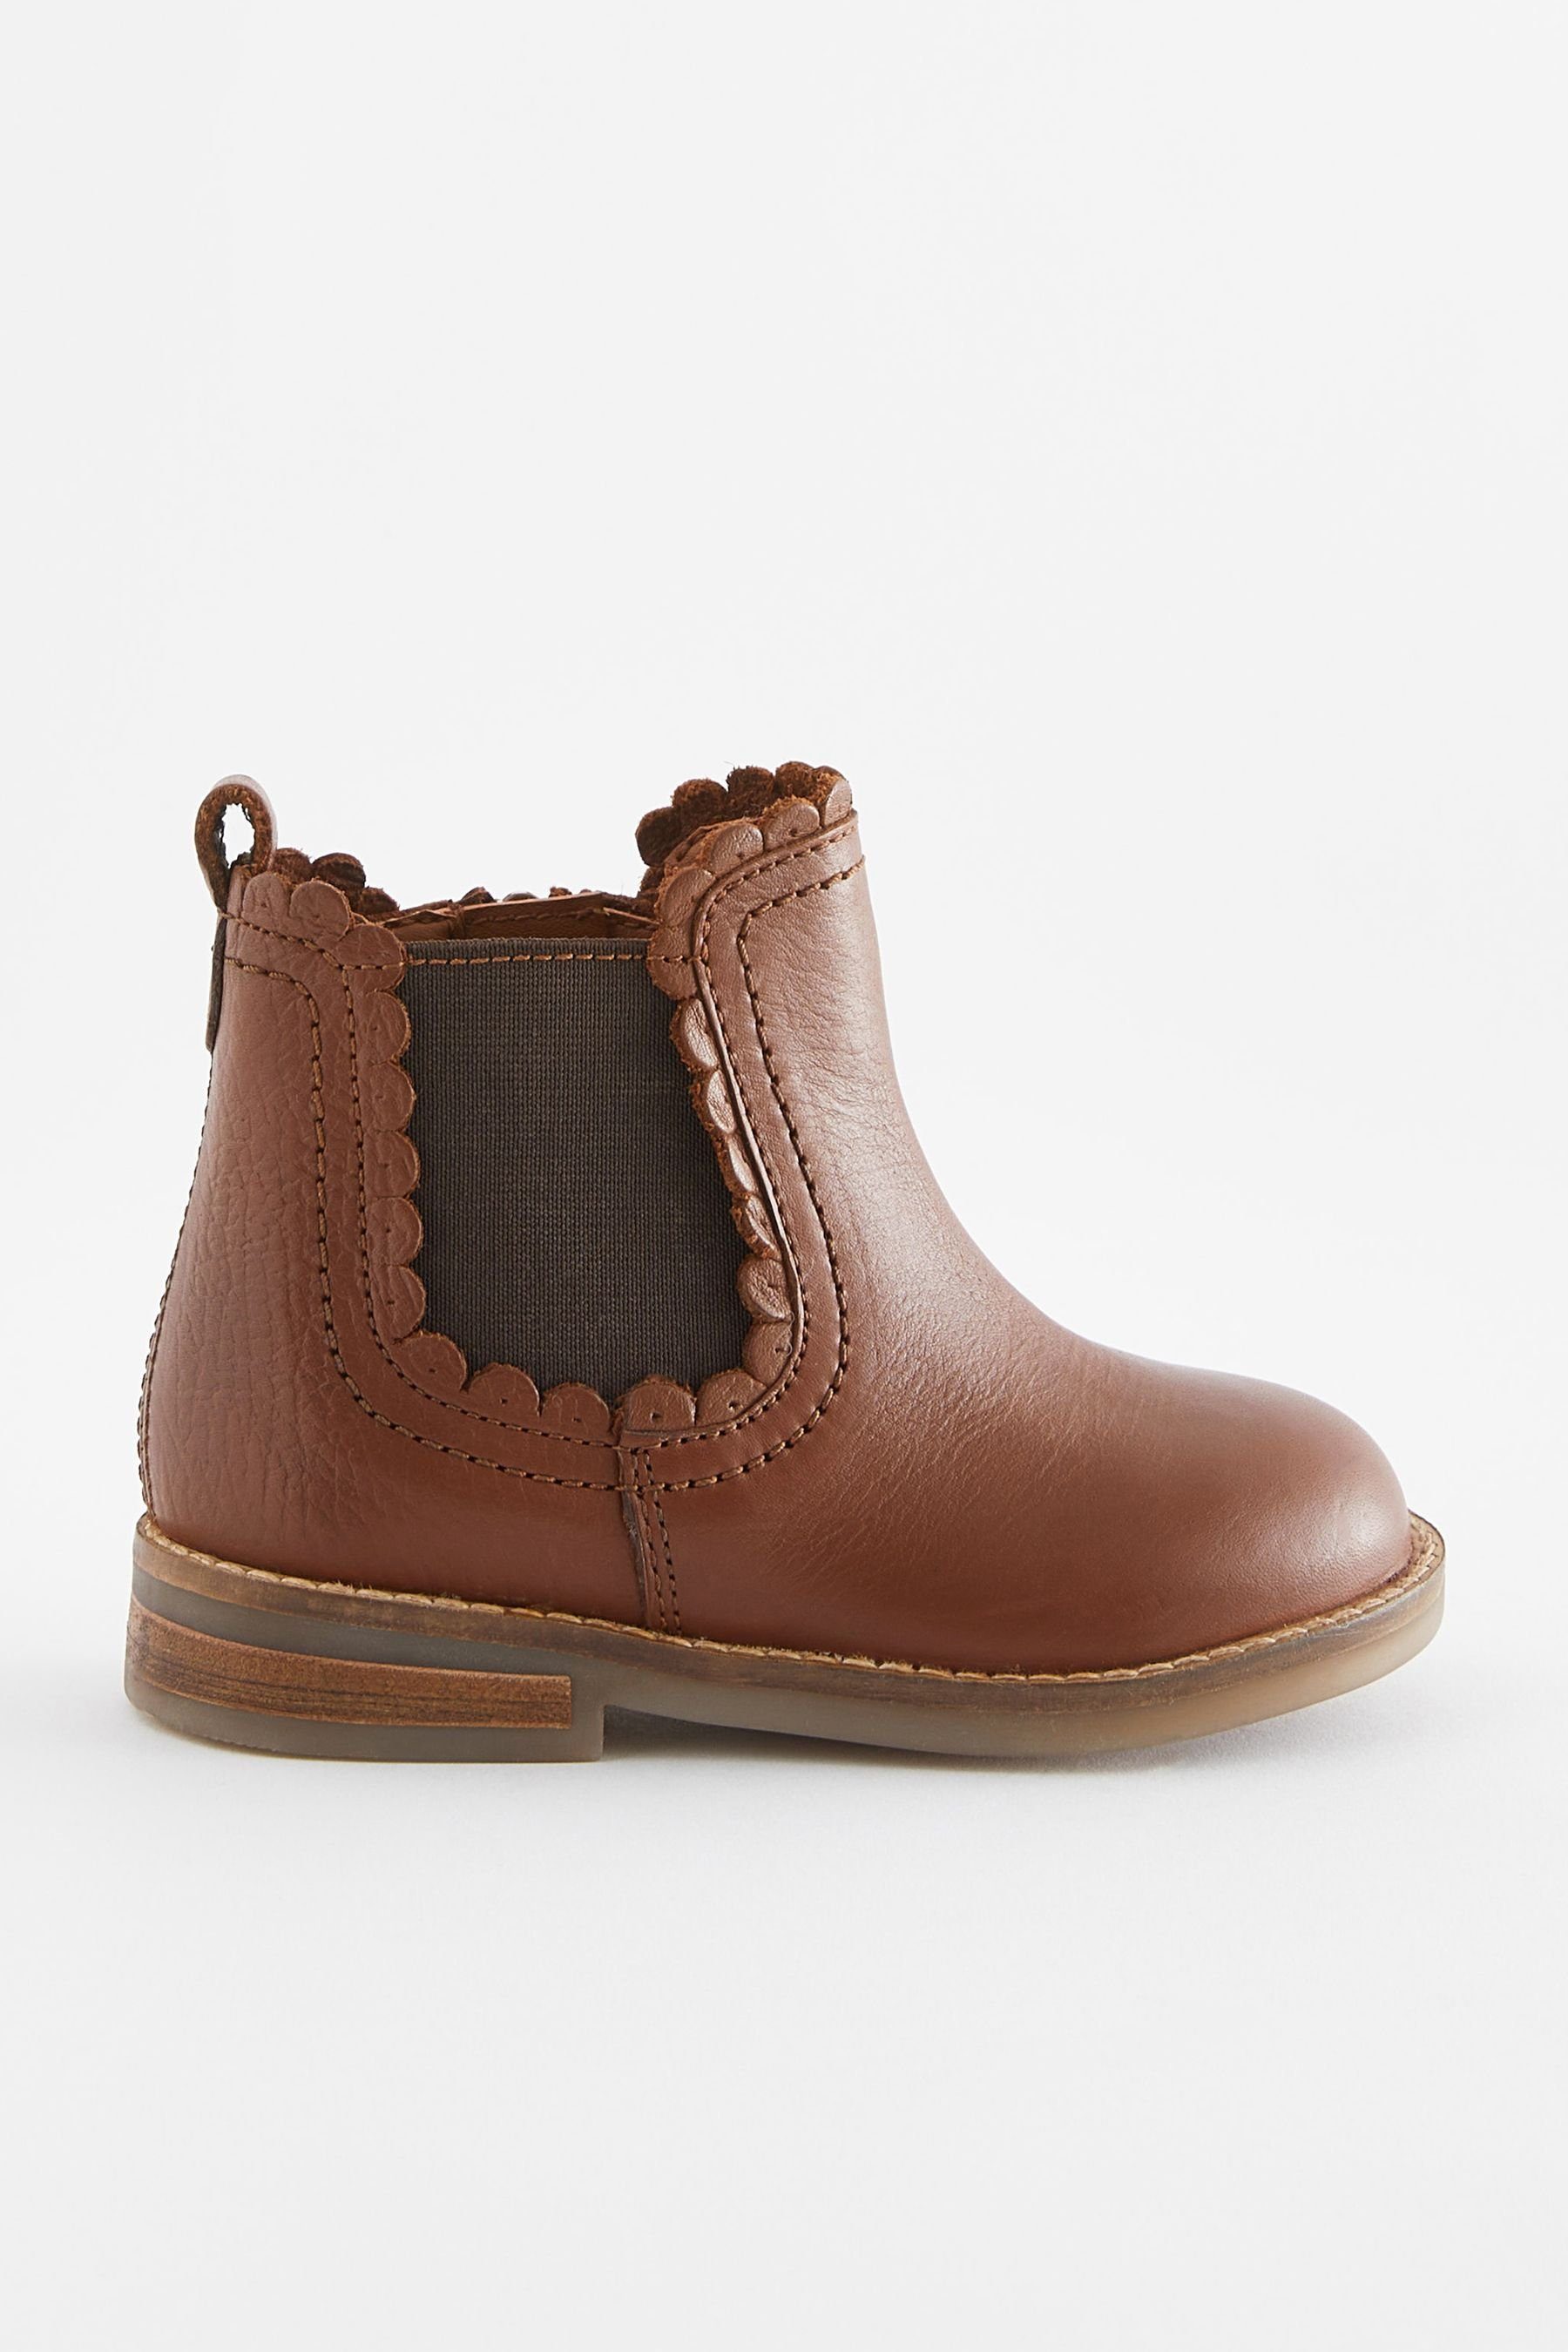 Next (1-tlg) Brown Chelseaboots mit Tan Leather weite Passform Chelsea-Boots Bogenkante,